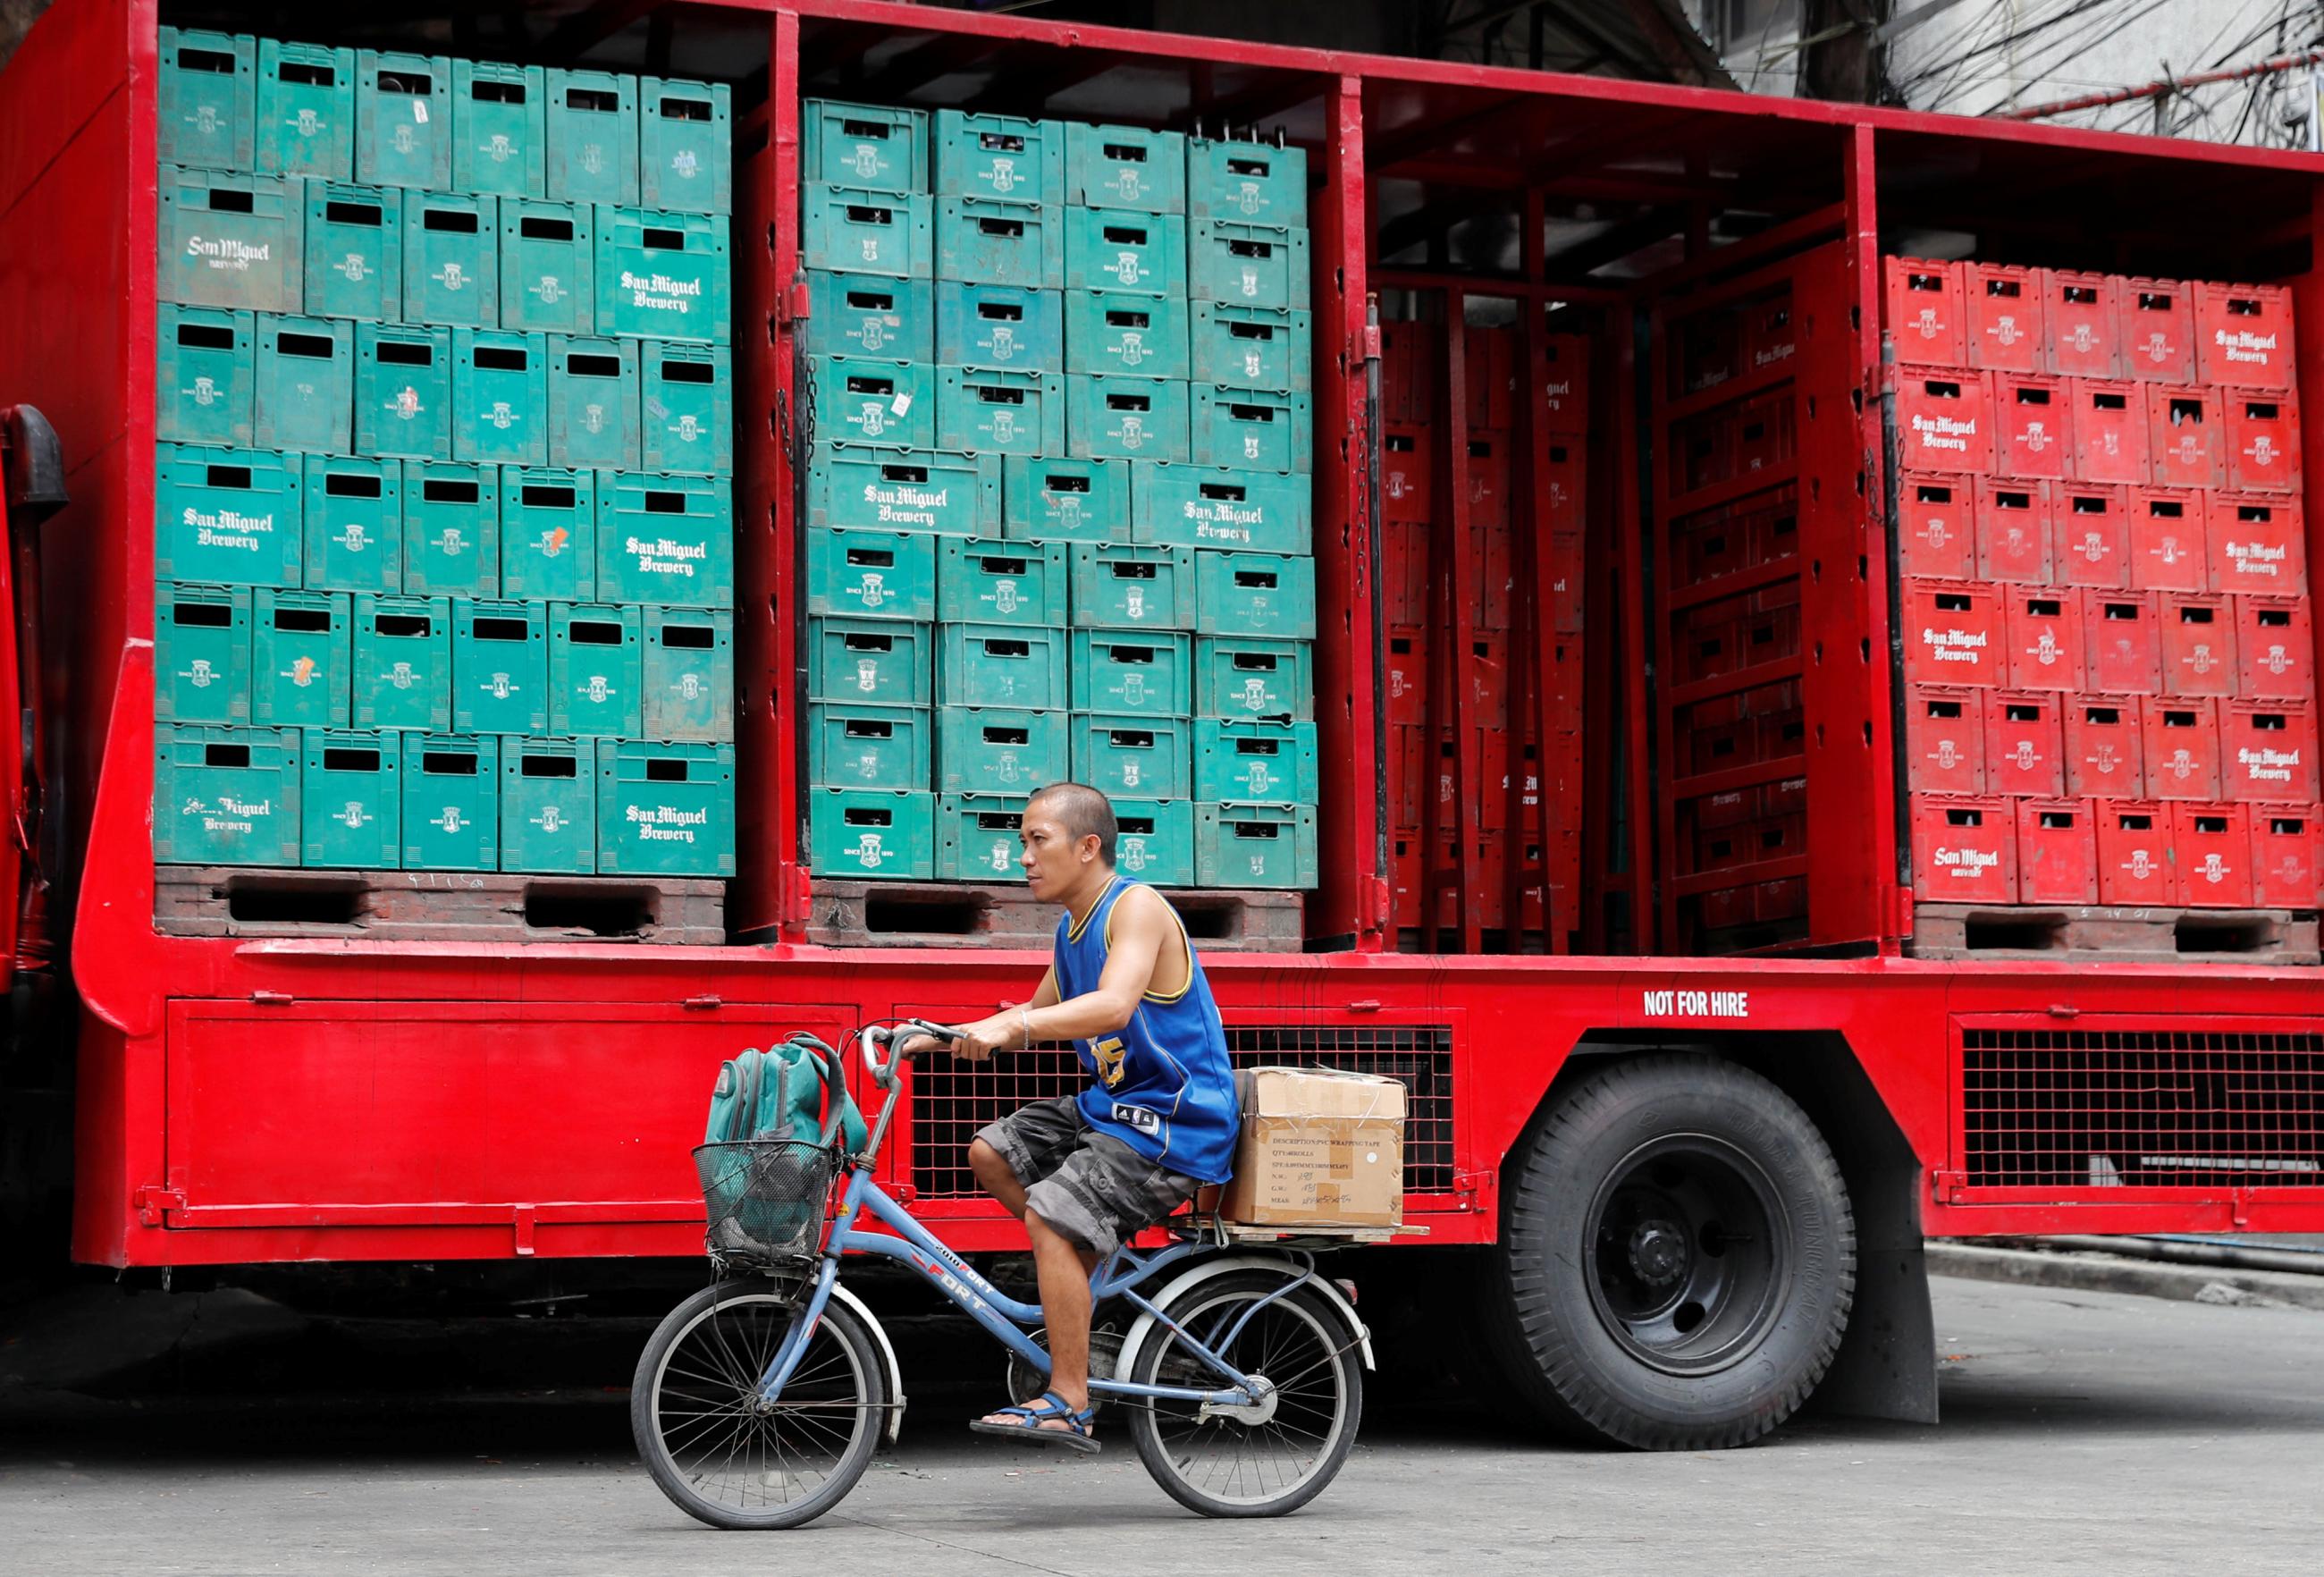 A man cycles past a delivery truck containing crates of San Miguel in Santa Cruz, Manila, Philippines, June 6, 2018. 